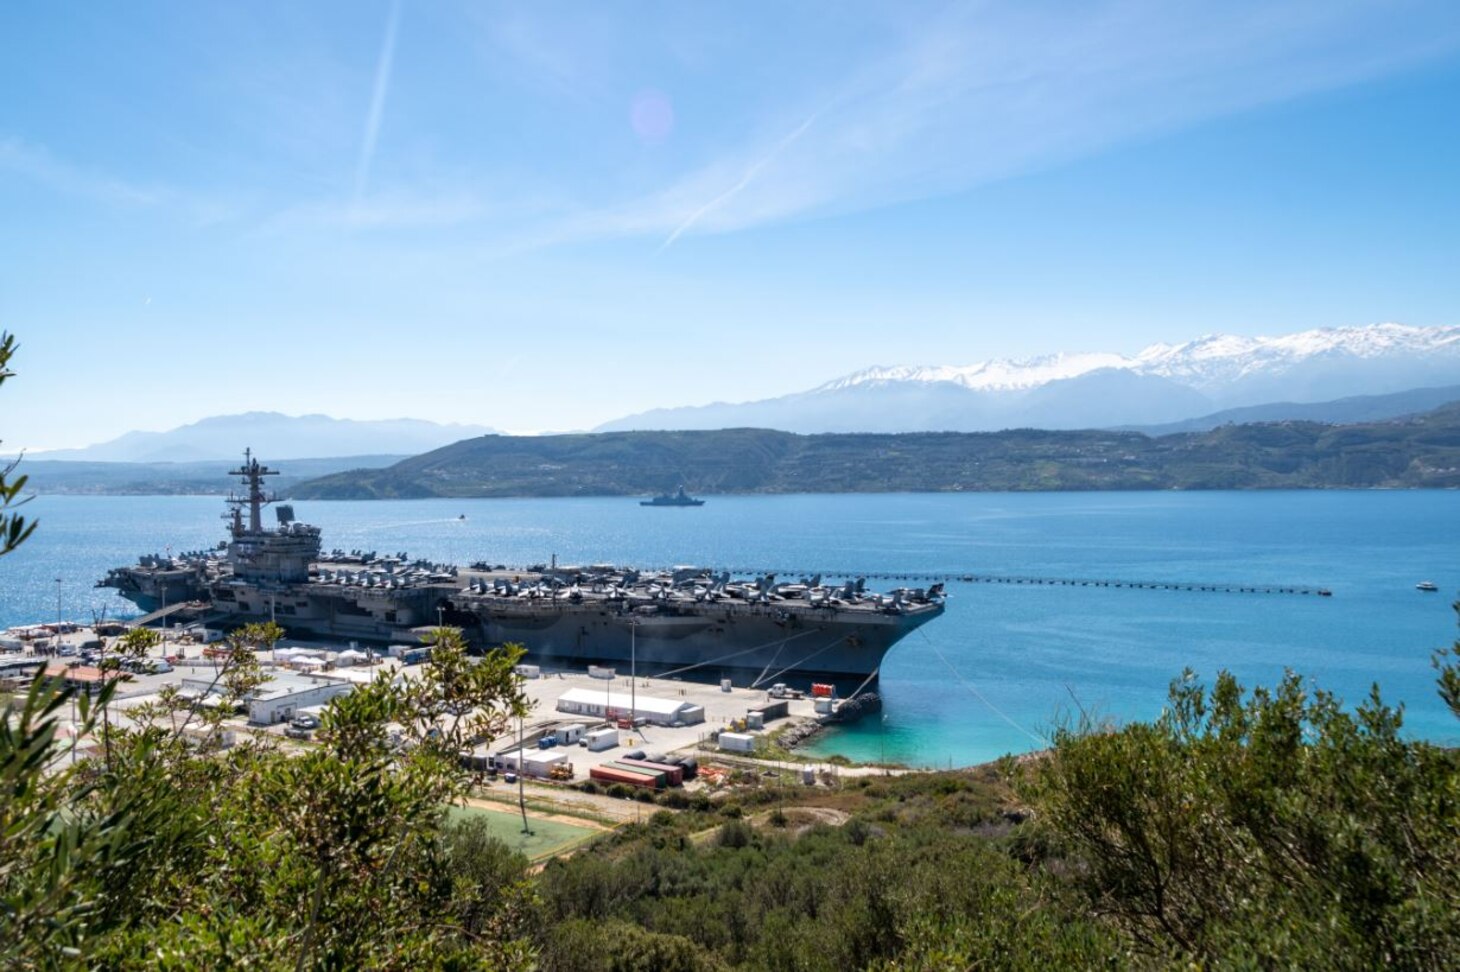 (March 10, 2023) The Nimitz-class aircraft carrier USS George H.W. Bush (CVN 77), along with the embarked staff of Carrier Strike Group 10, arrives in Souda Bay, Crete for a scheduled port visit, March 10, 2023. The George H.W. Bush Carrier Strike Group is on a scheduled deployment in the U.S. Naval Forces Europe area of operations, employed by U.S. Sixth Fleet, to defend U.S., allied, and partner interests. NSA Souda Bay is an operational ashore installation which enables and supports U.S., Allied, Coalition, and Partner nation forces to preserve security and stability in the European, African, and Central Command areas of responsibility.